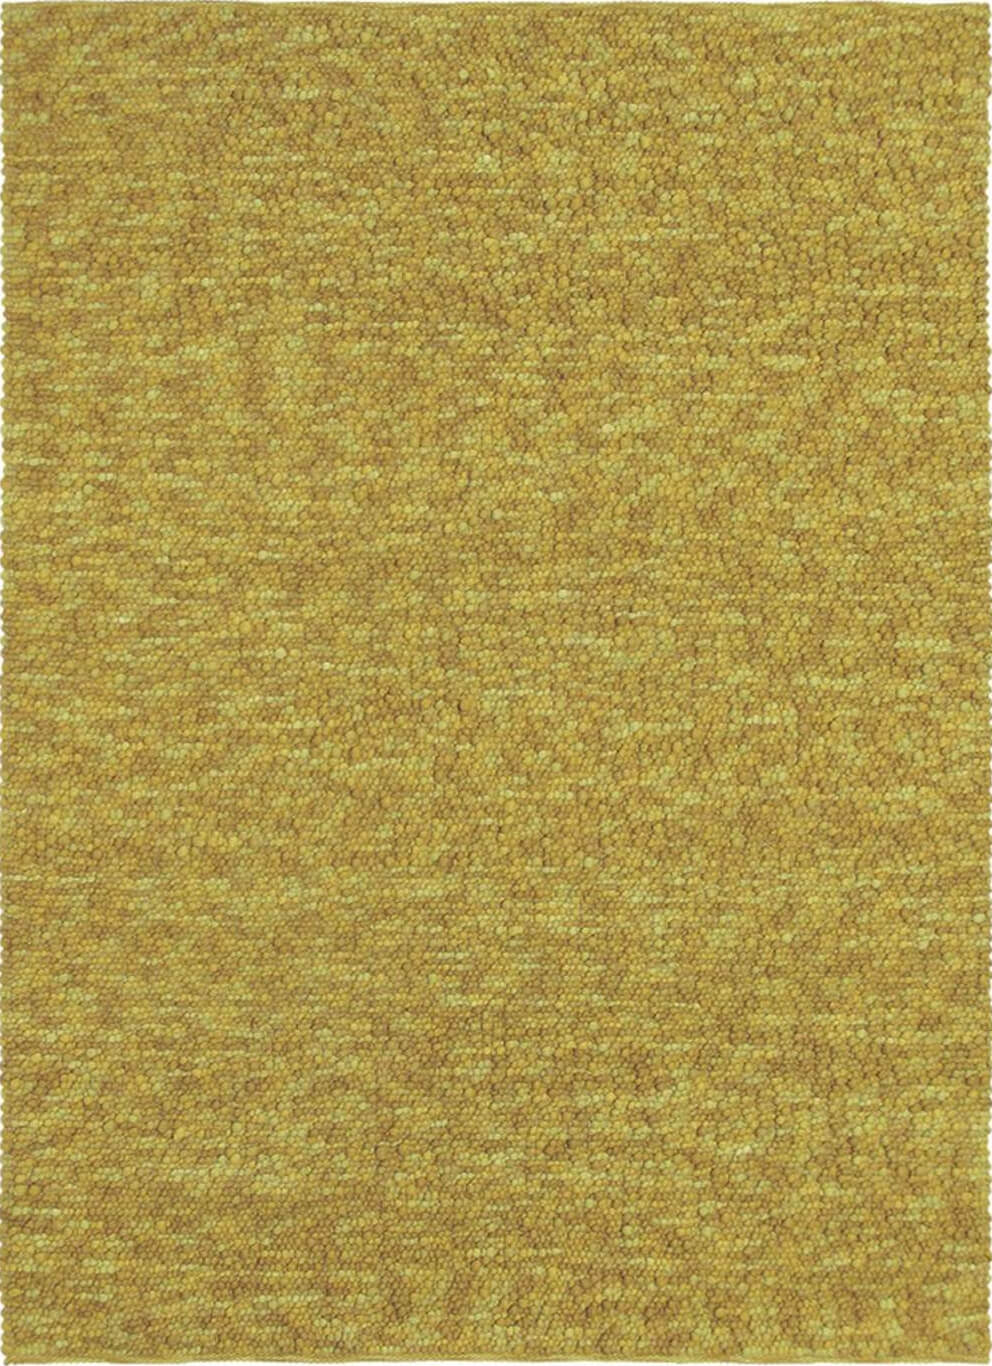 Stubble 29706 Rug by Brink & Campman ☞ Size: 200 x 280 cm